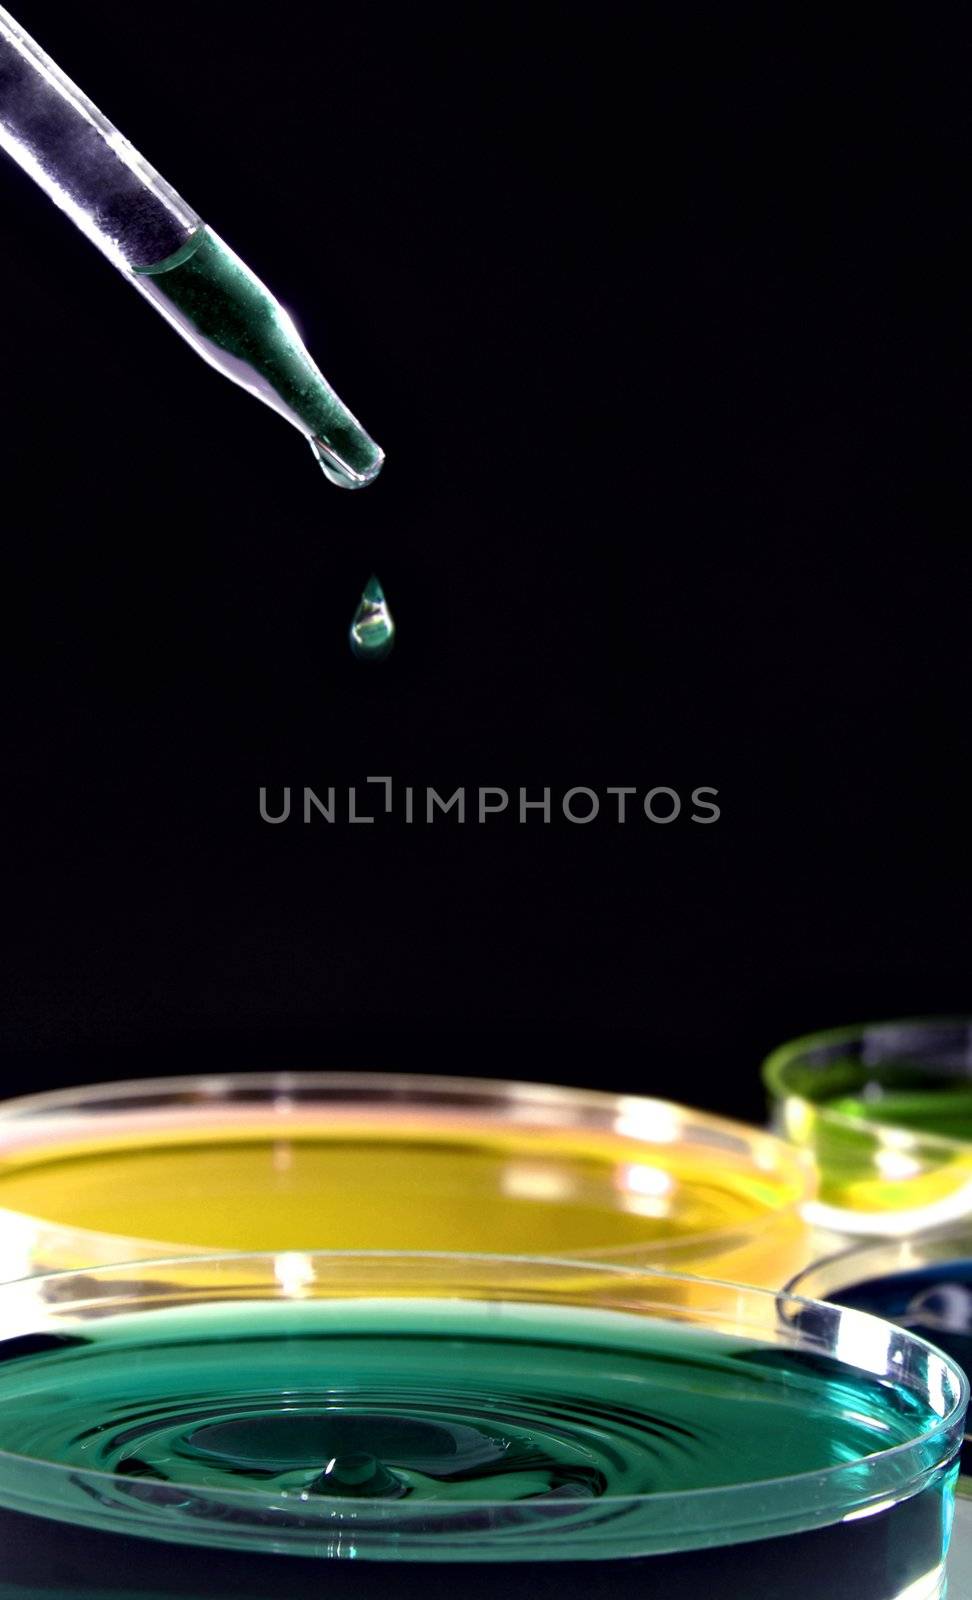 Laboratory pipette filled with green liquid